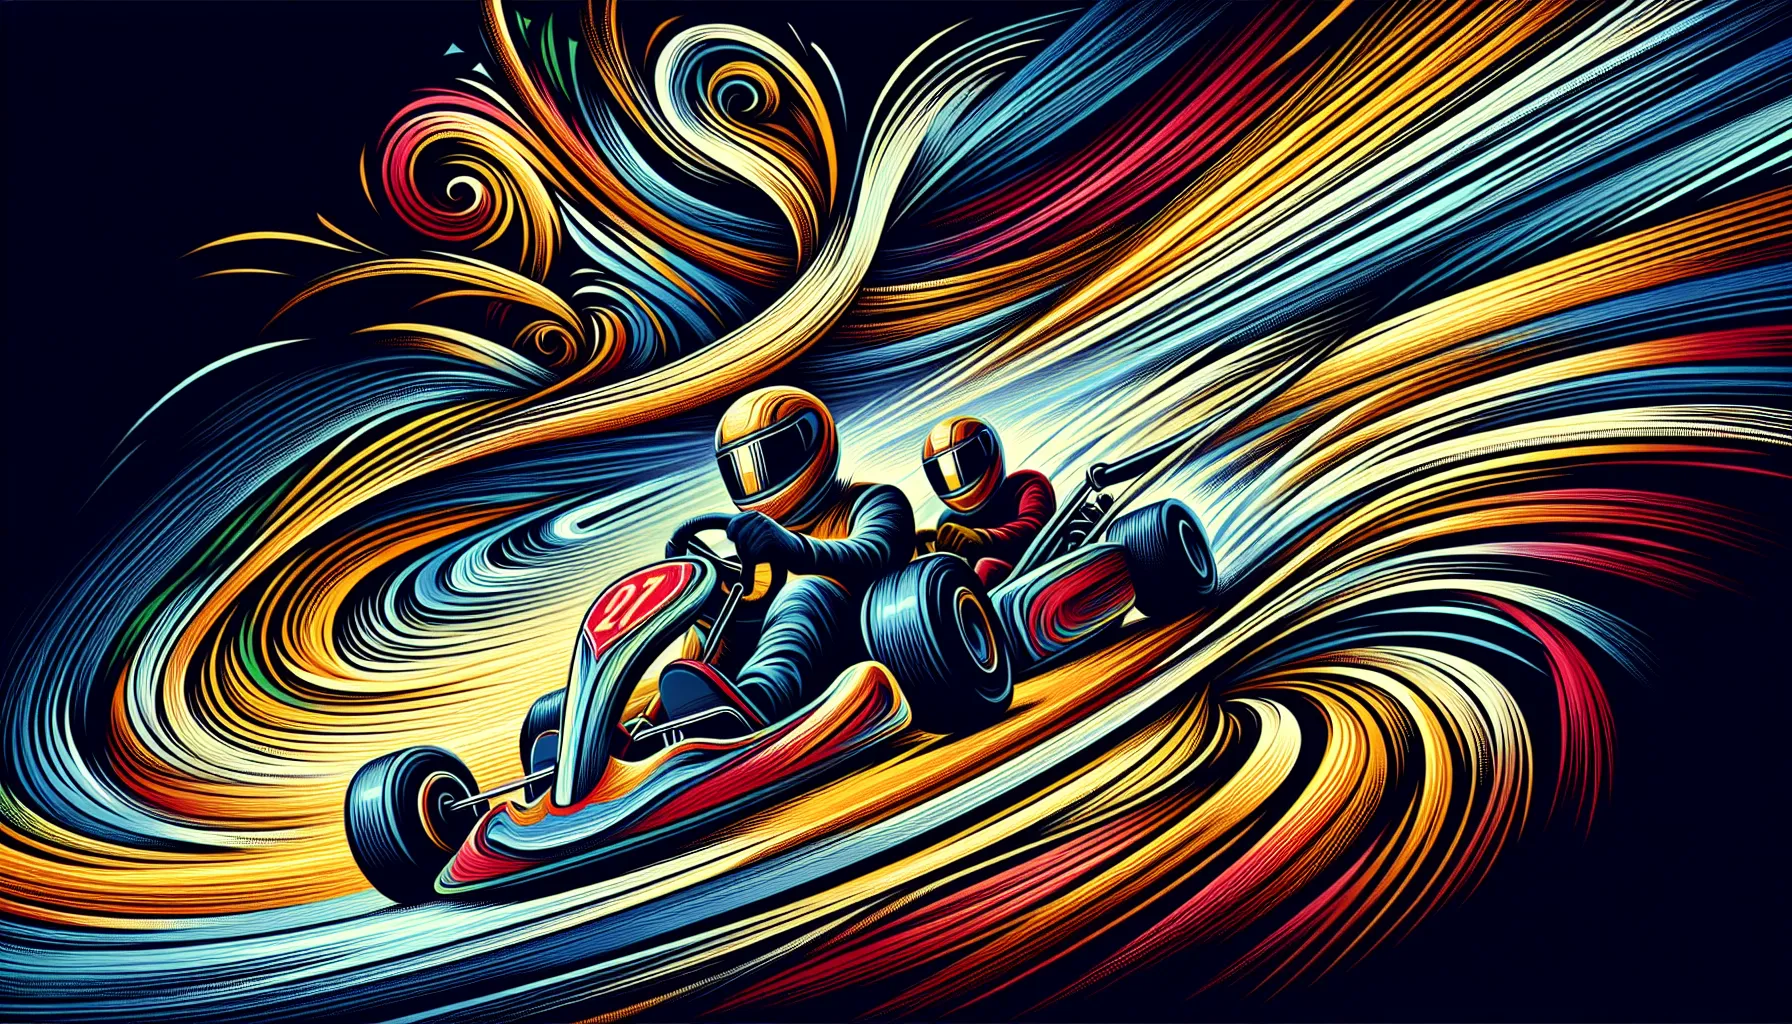 Feel the rush: an abstract portrayal of go-karts zooming in unison, where shared adrenaline turns every curve into a heart-racing moment of unity.